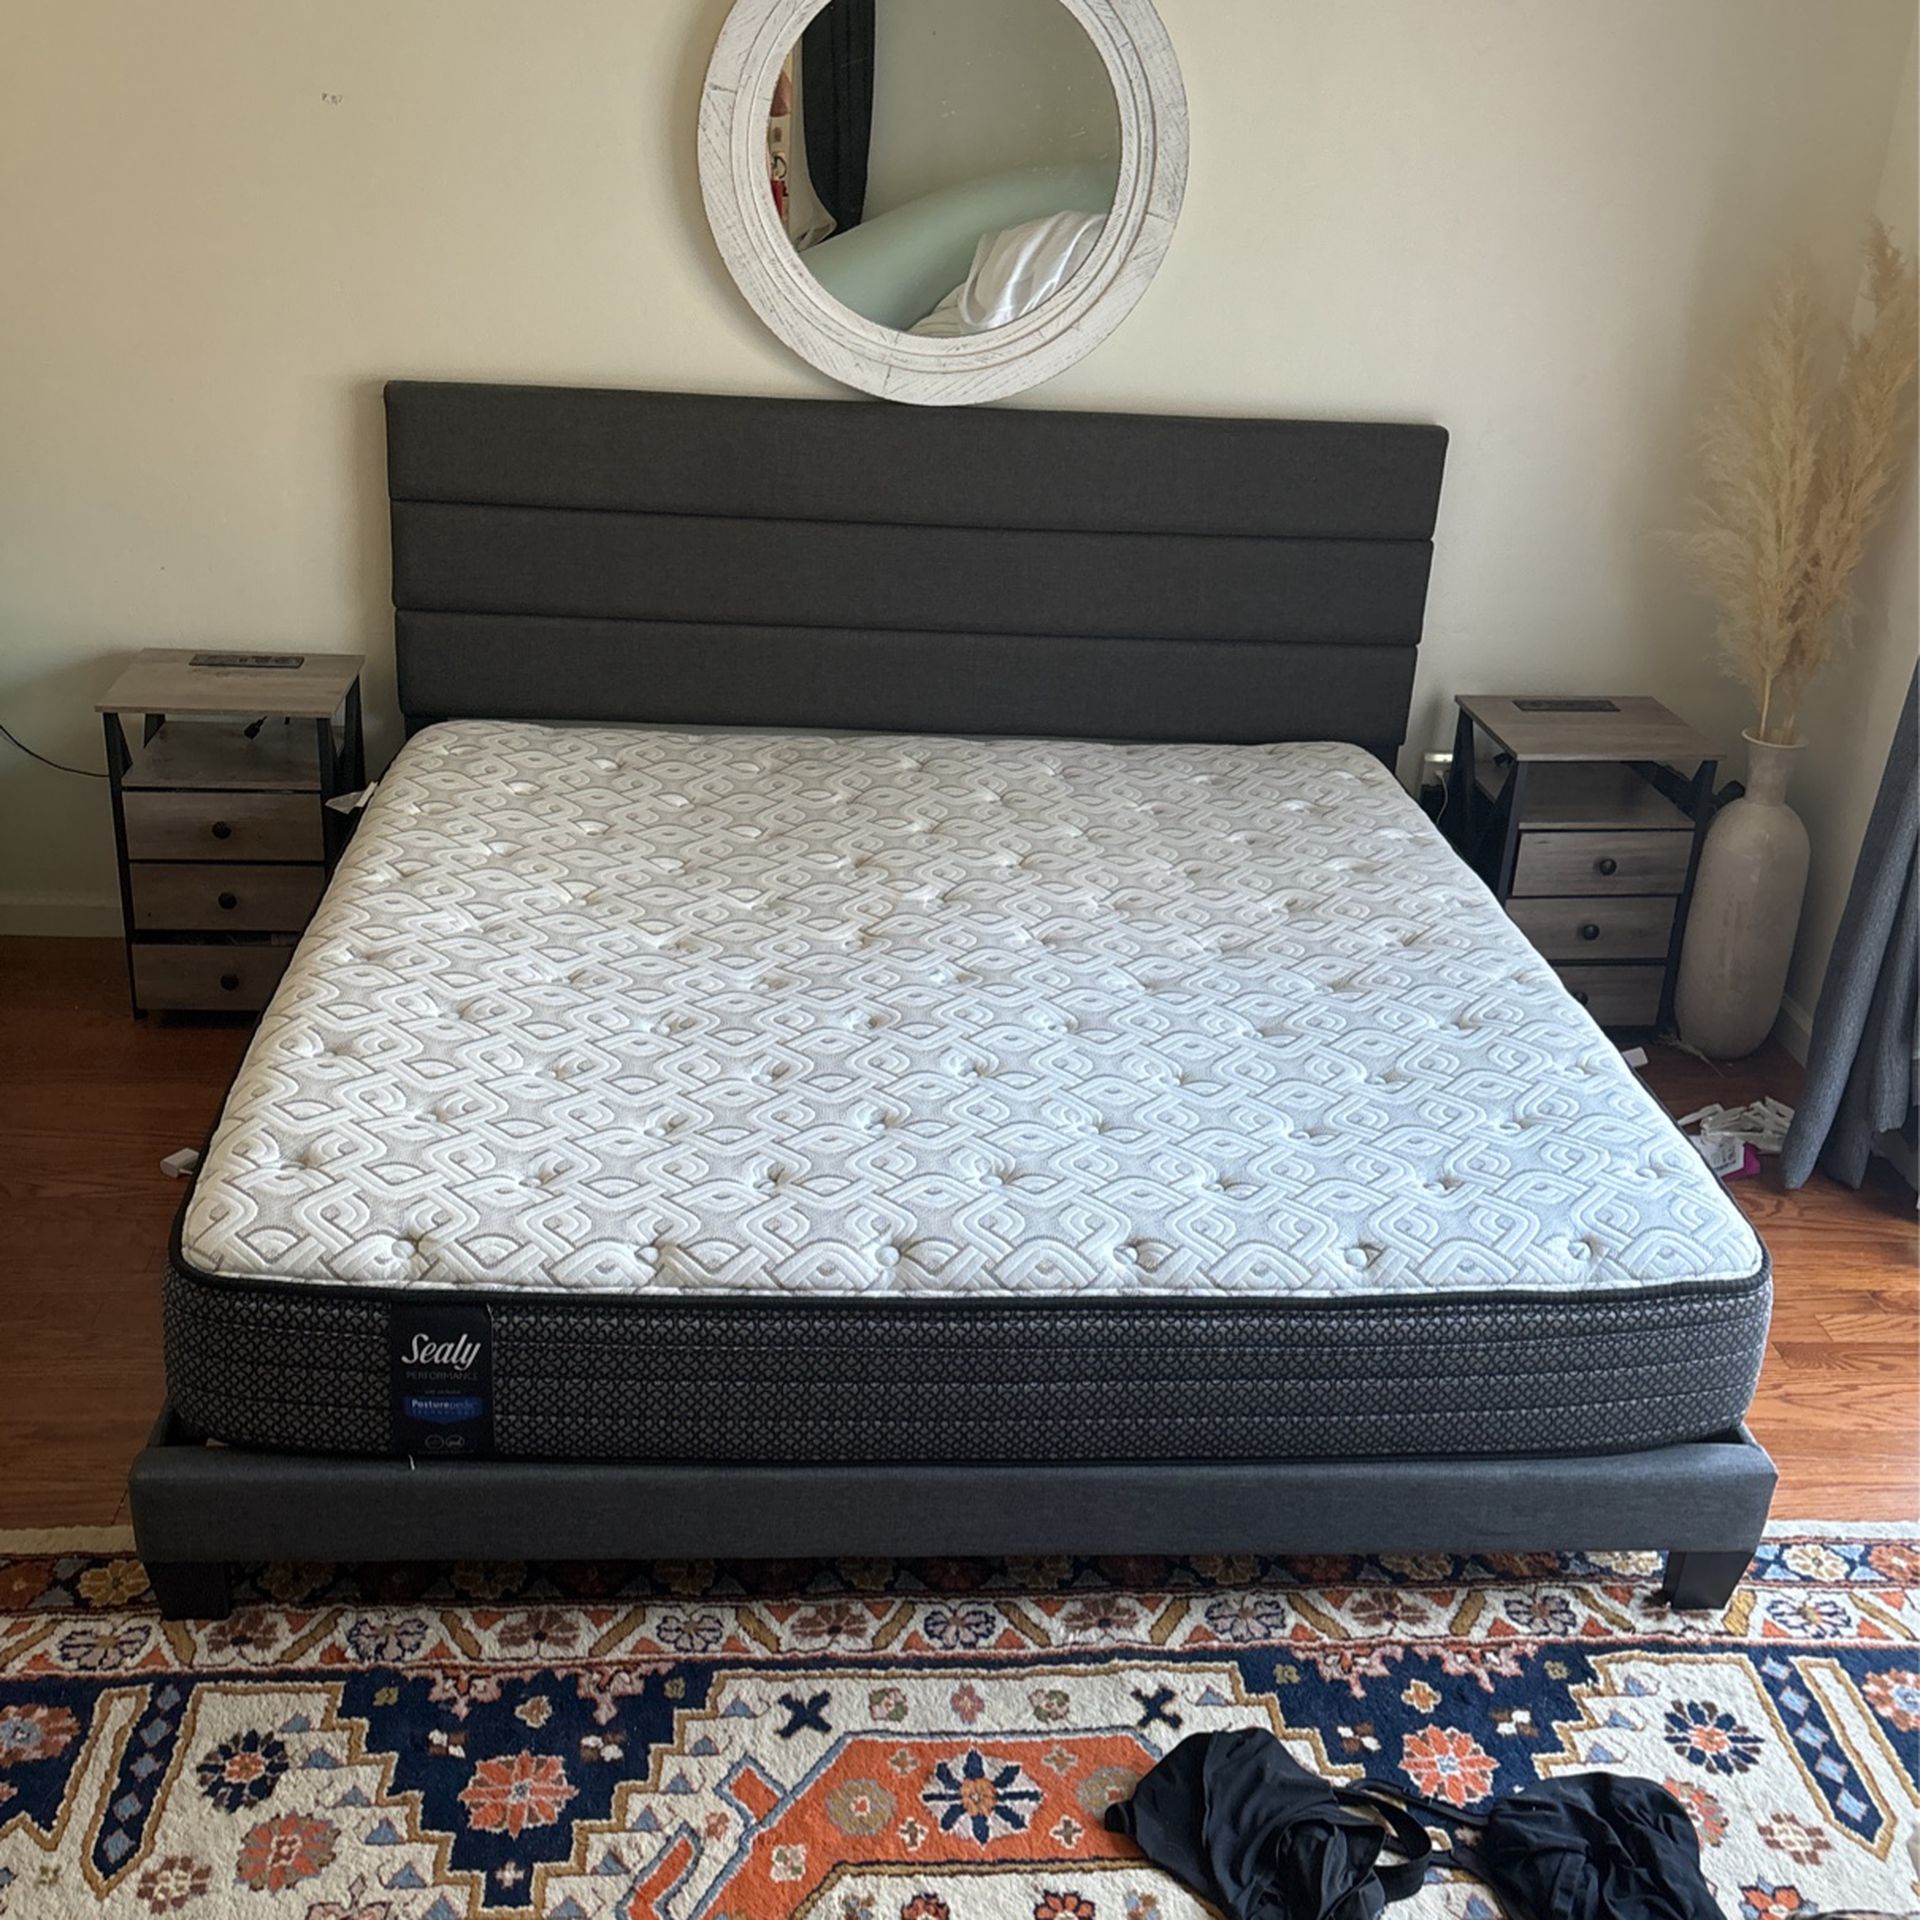 Cal King Bed And Bedframe